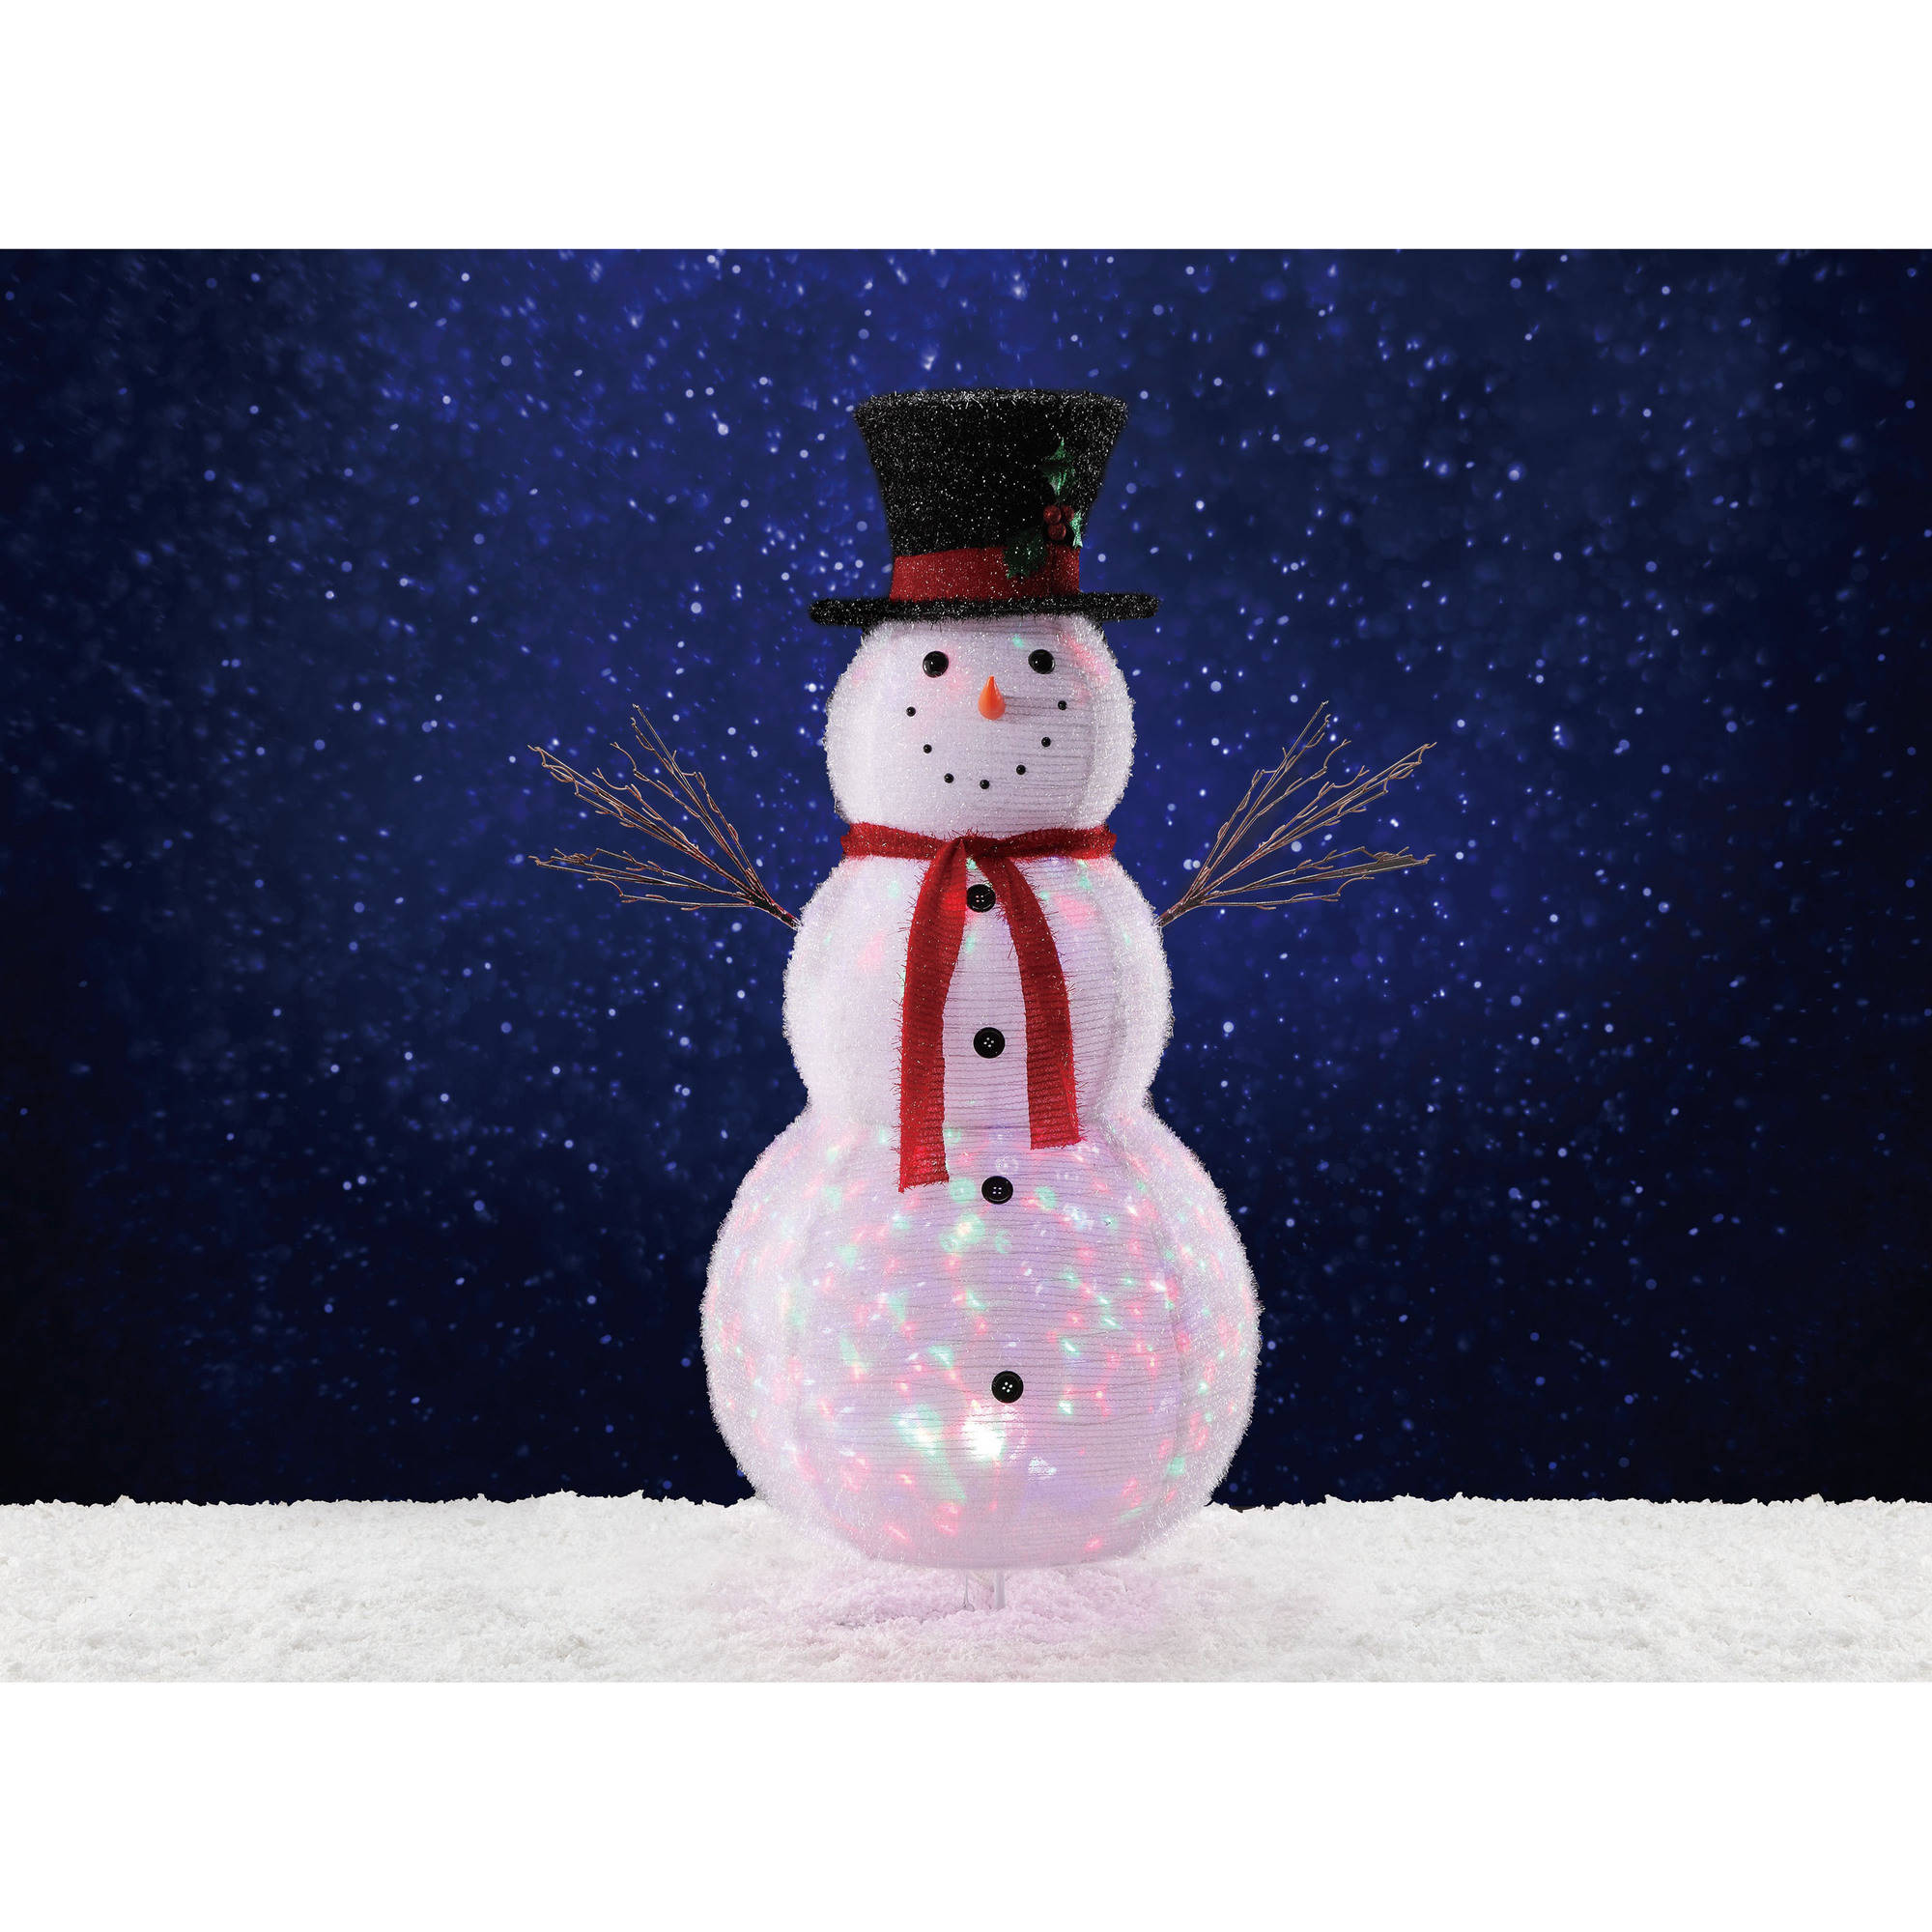 Holiday Time 52" Jumbo Pop-up Snowman with Revolving Multi-Colored Light Show Light Sculpture - image 1 of 2